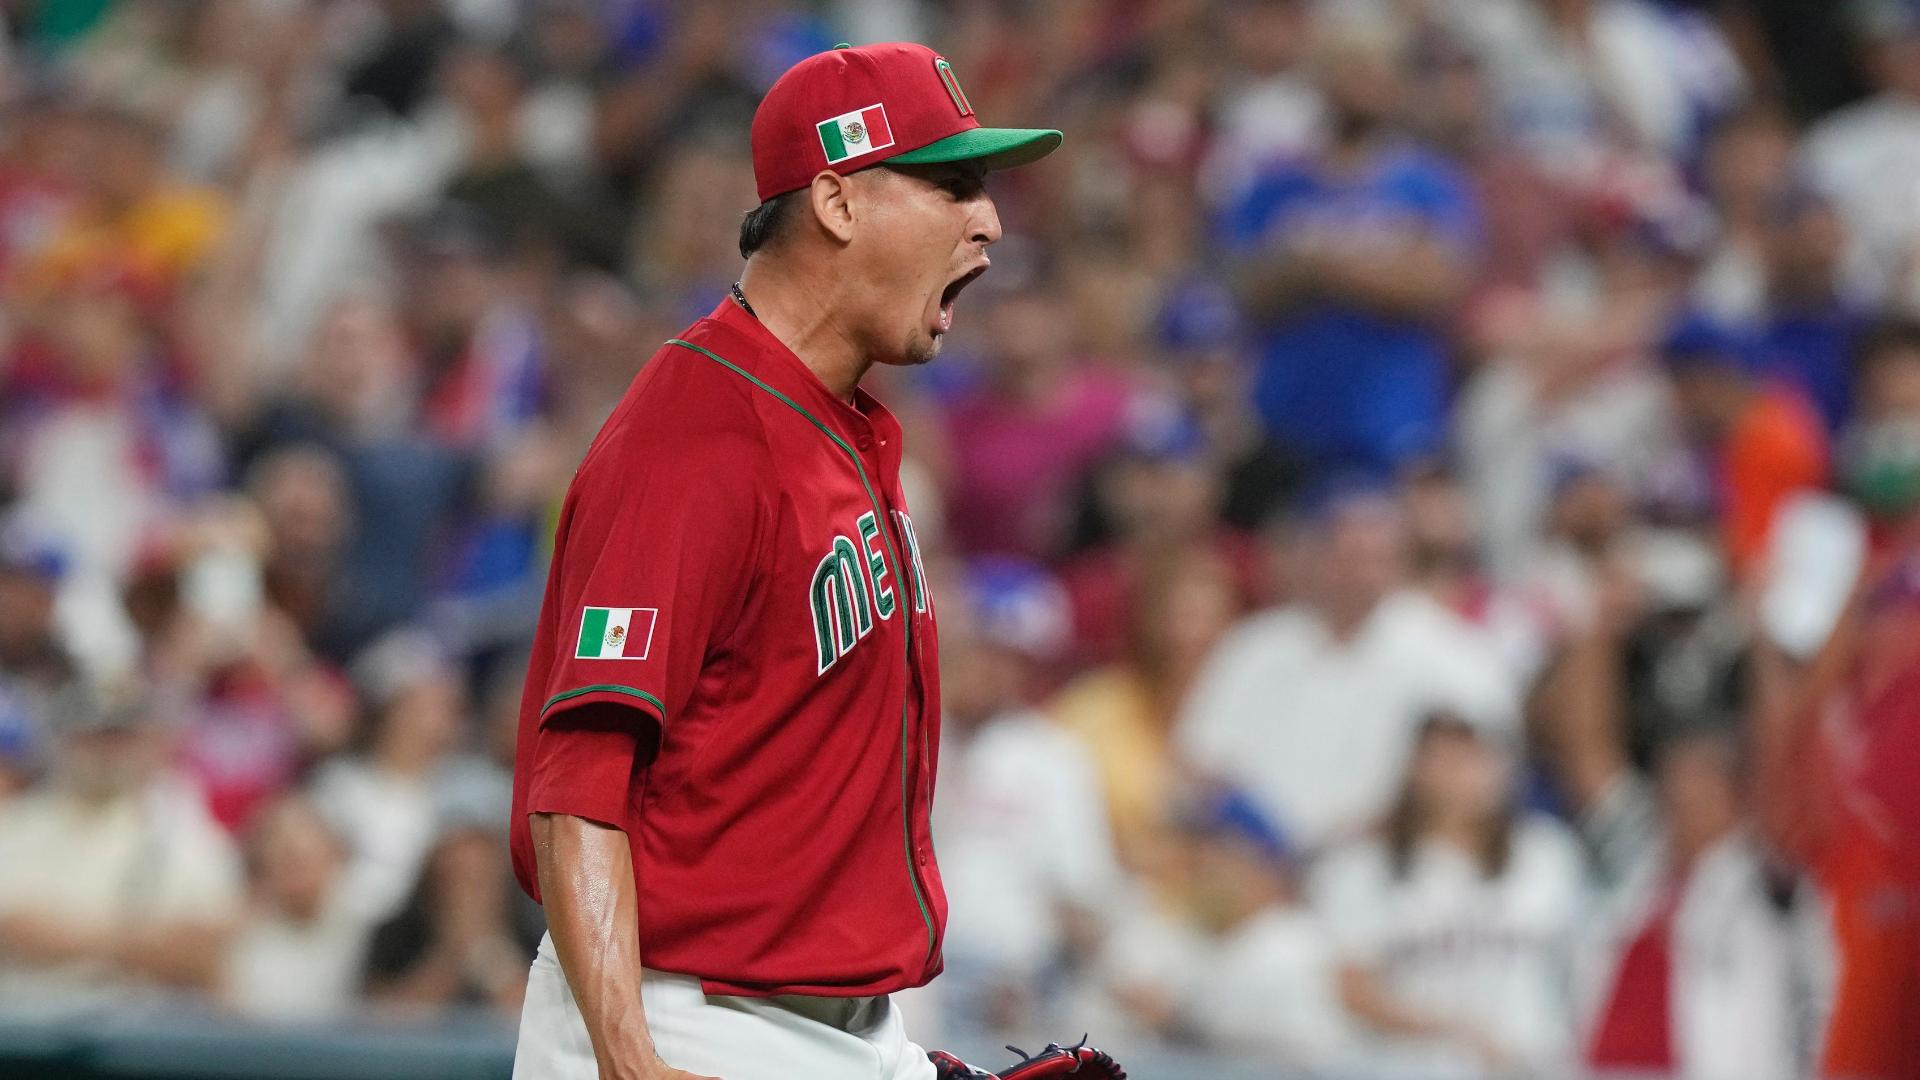 Mexico Rallies Past Puerto Rico, Advances To WBC Semifinals For First Time  — College Baseball, MLB Draft, Prospects - Baseball America